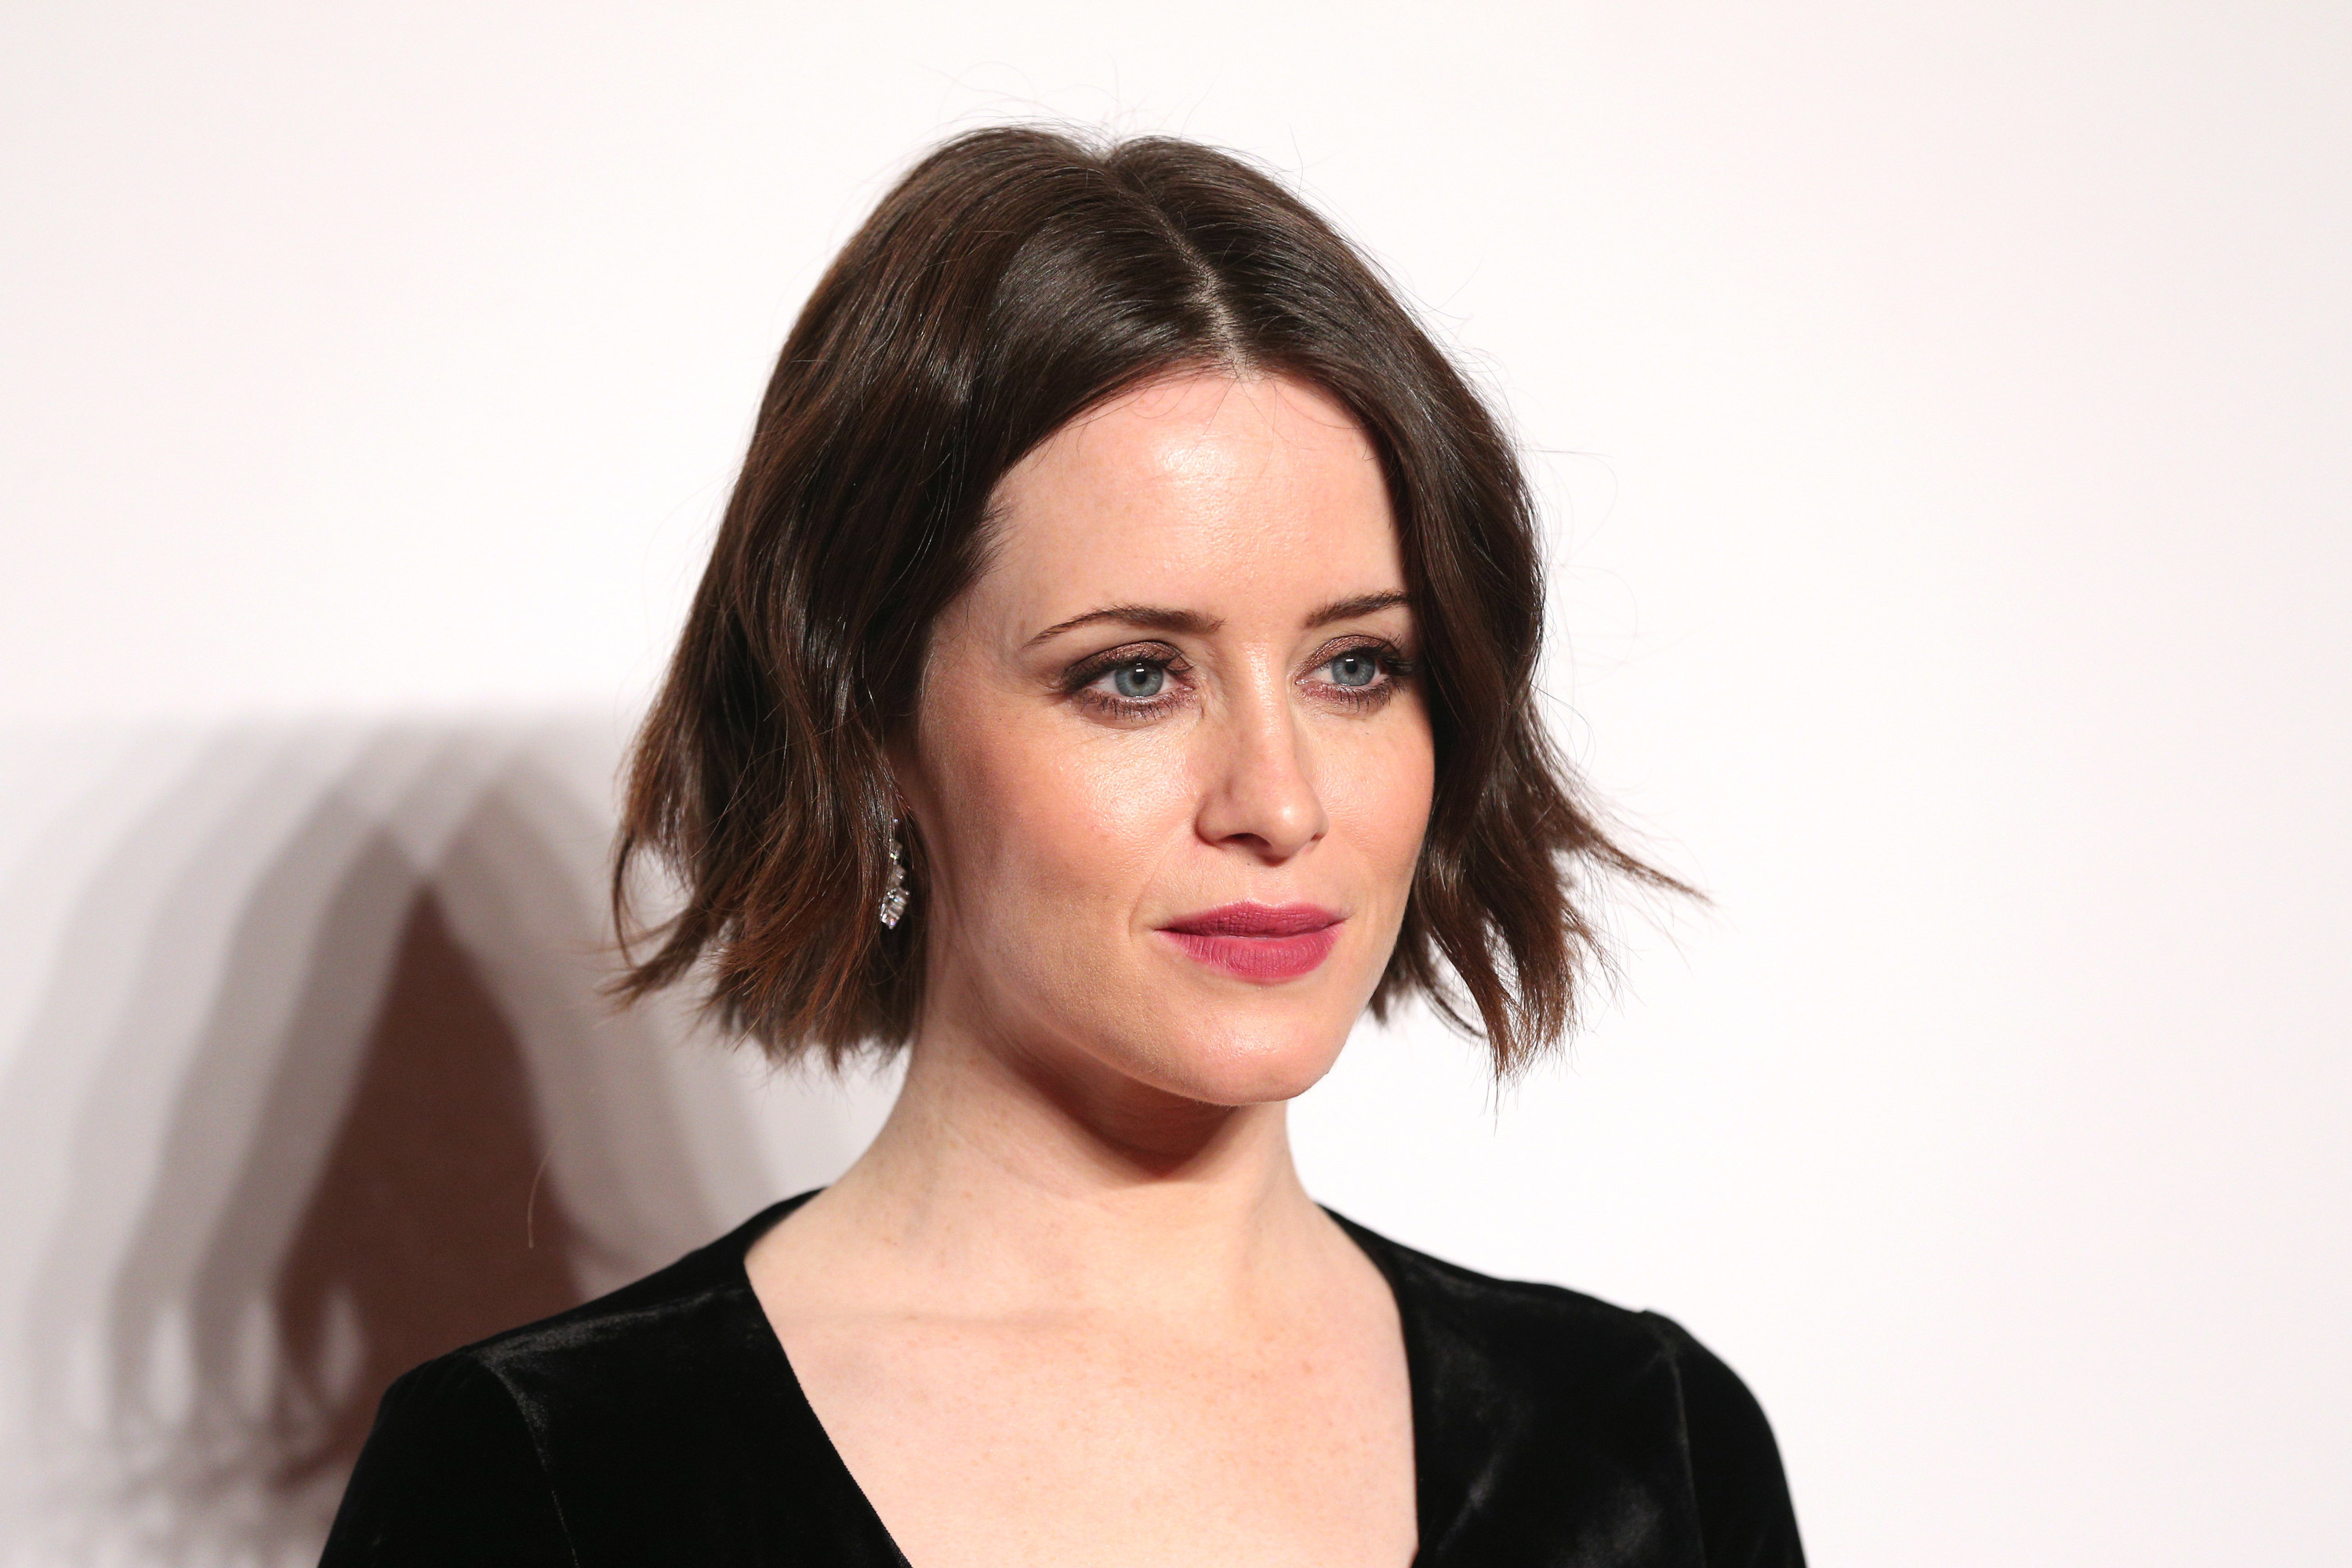 Claire Foy On Why Sex Scenes Can Feel Exploitative pic